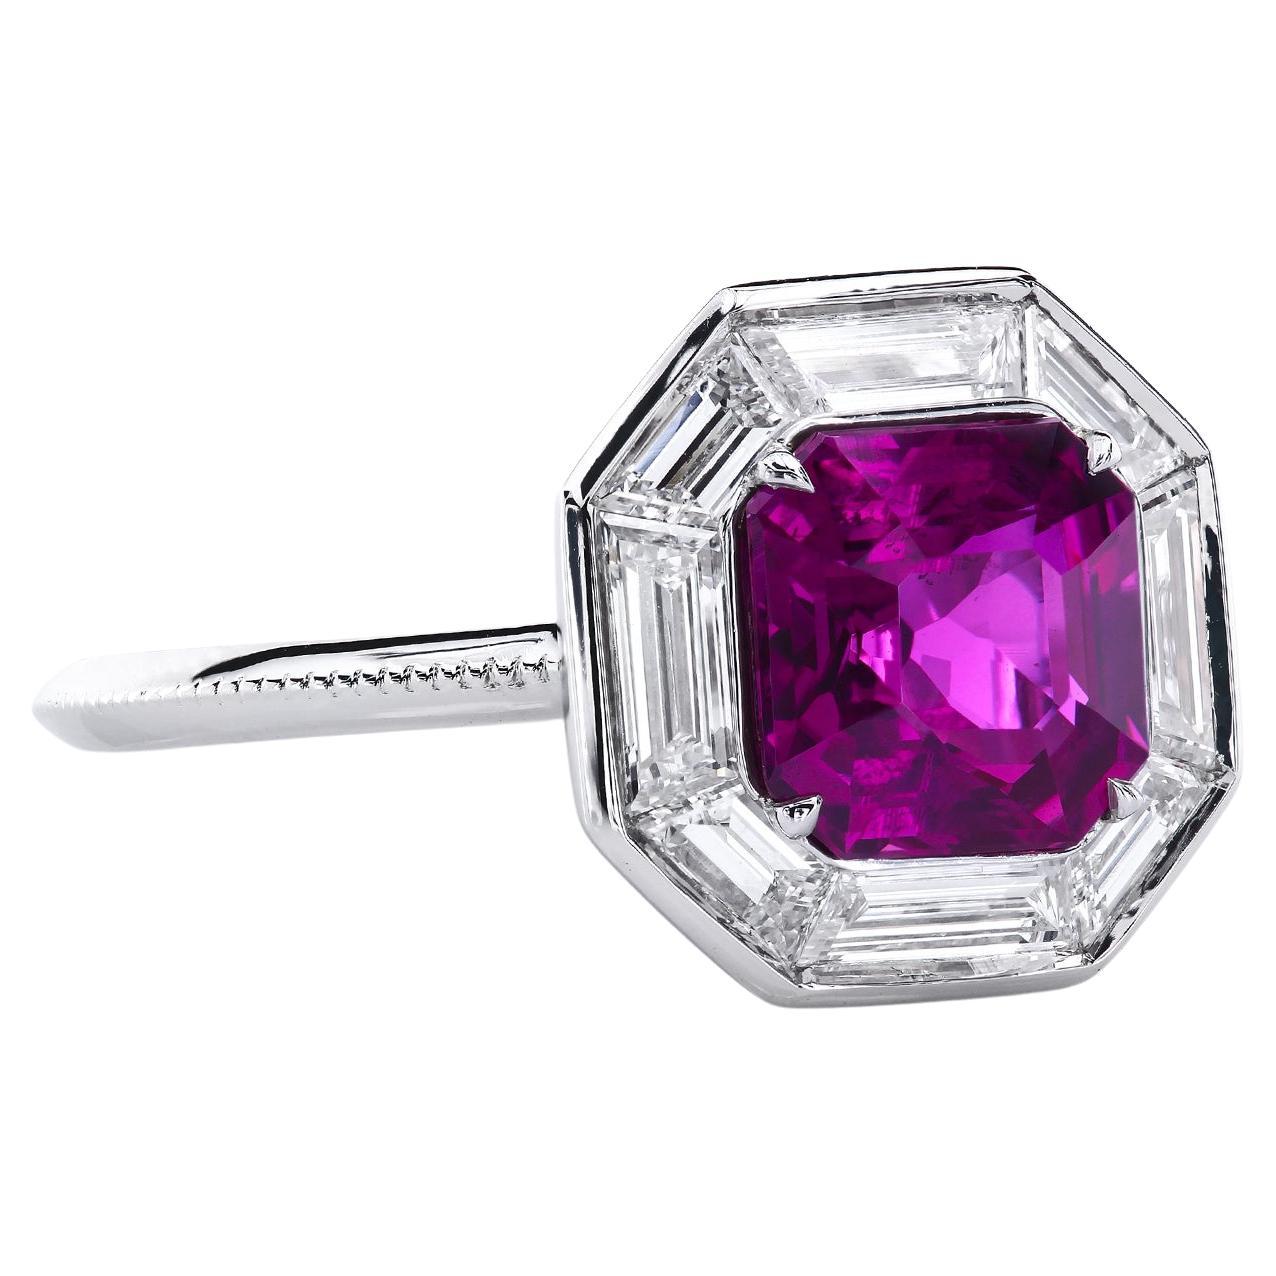 Leon Mege platinum ring with natural hot-pink sapphire and diamond daguettes